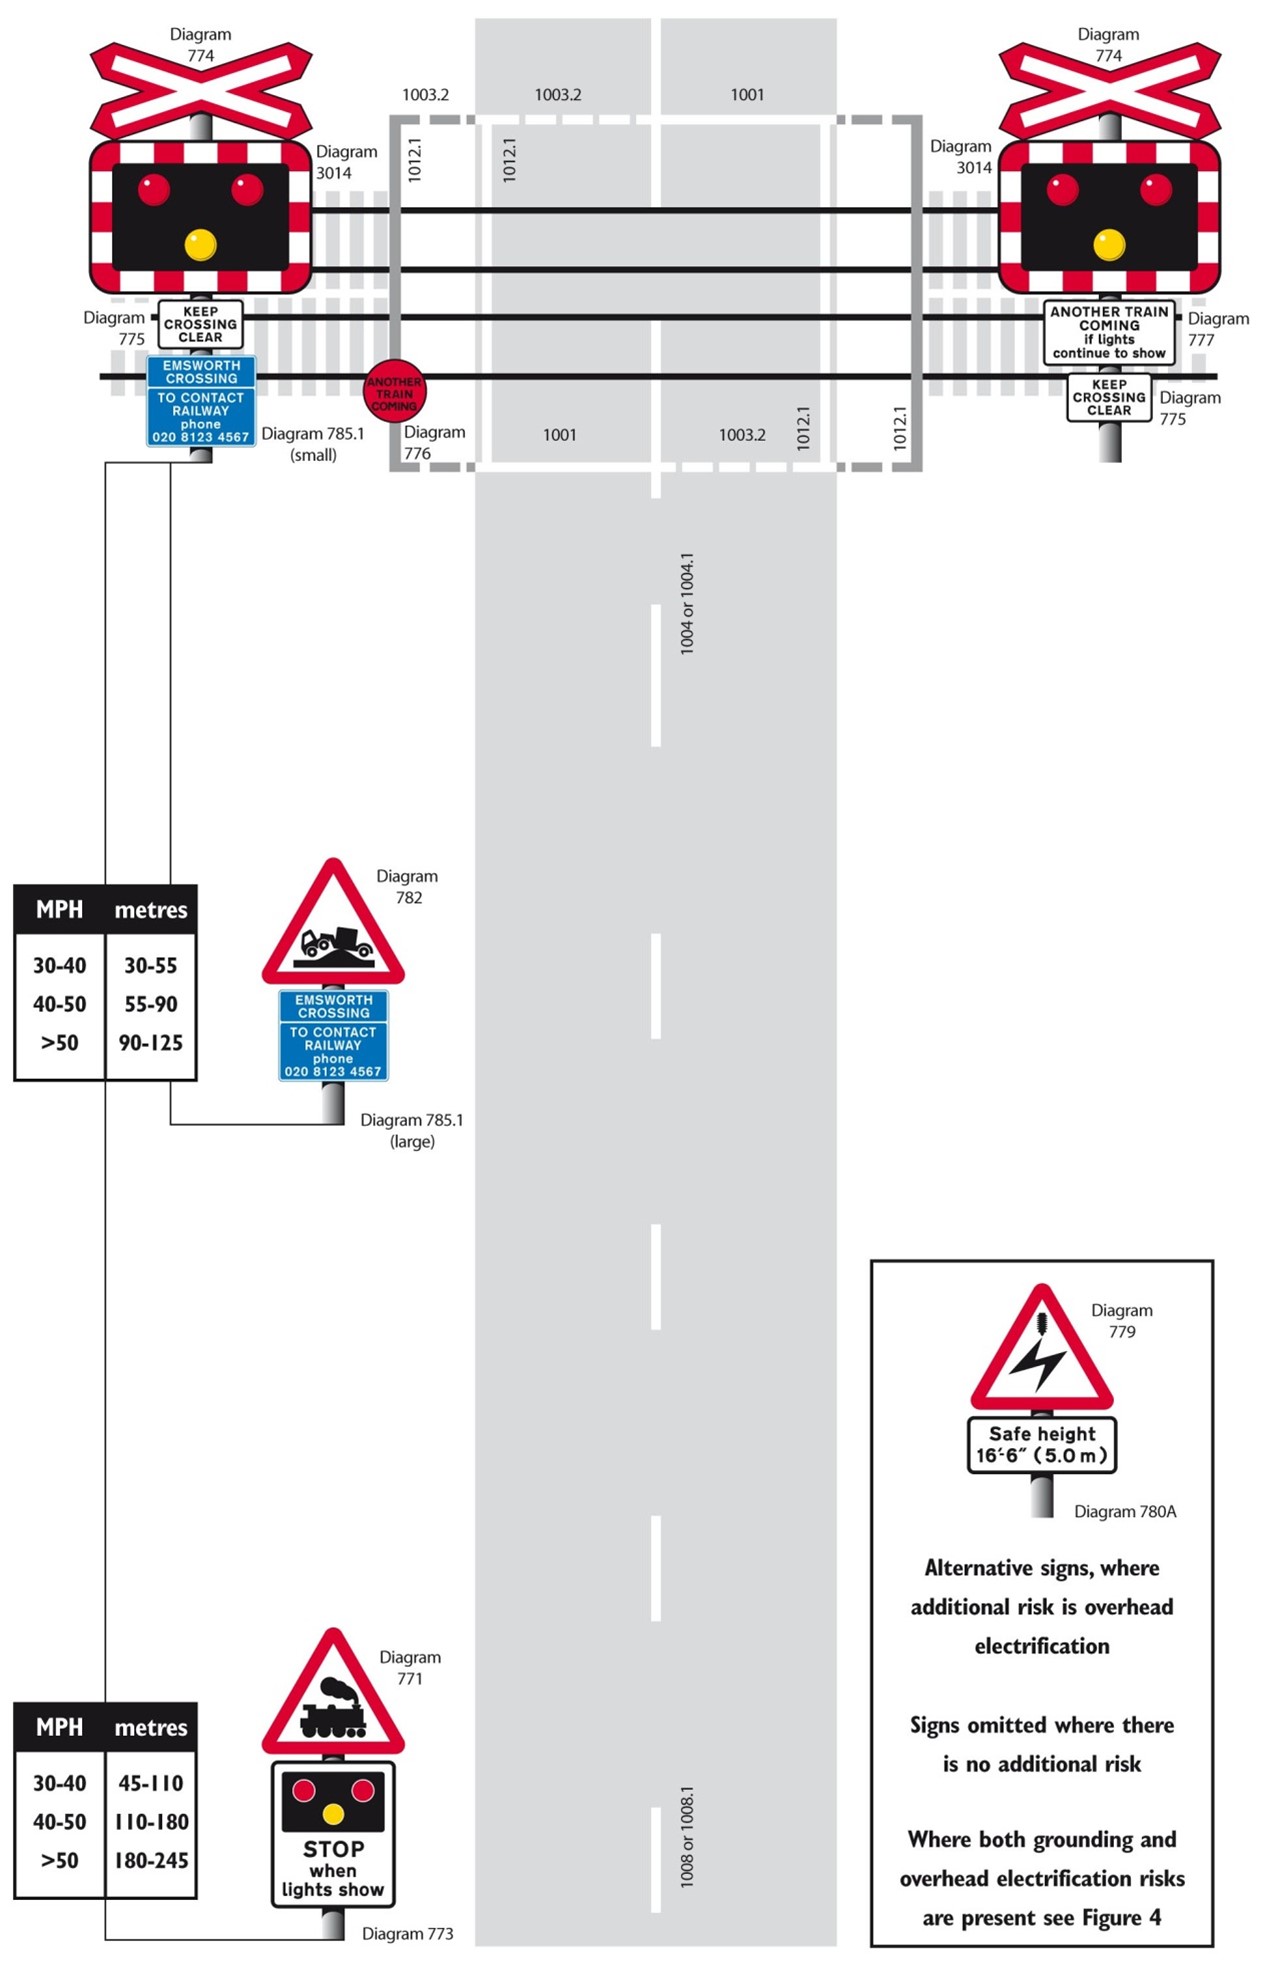 Figure 5: Typical layout of automatic open crossing (with additional risks)